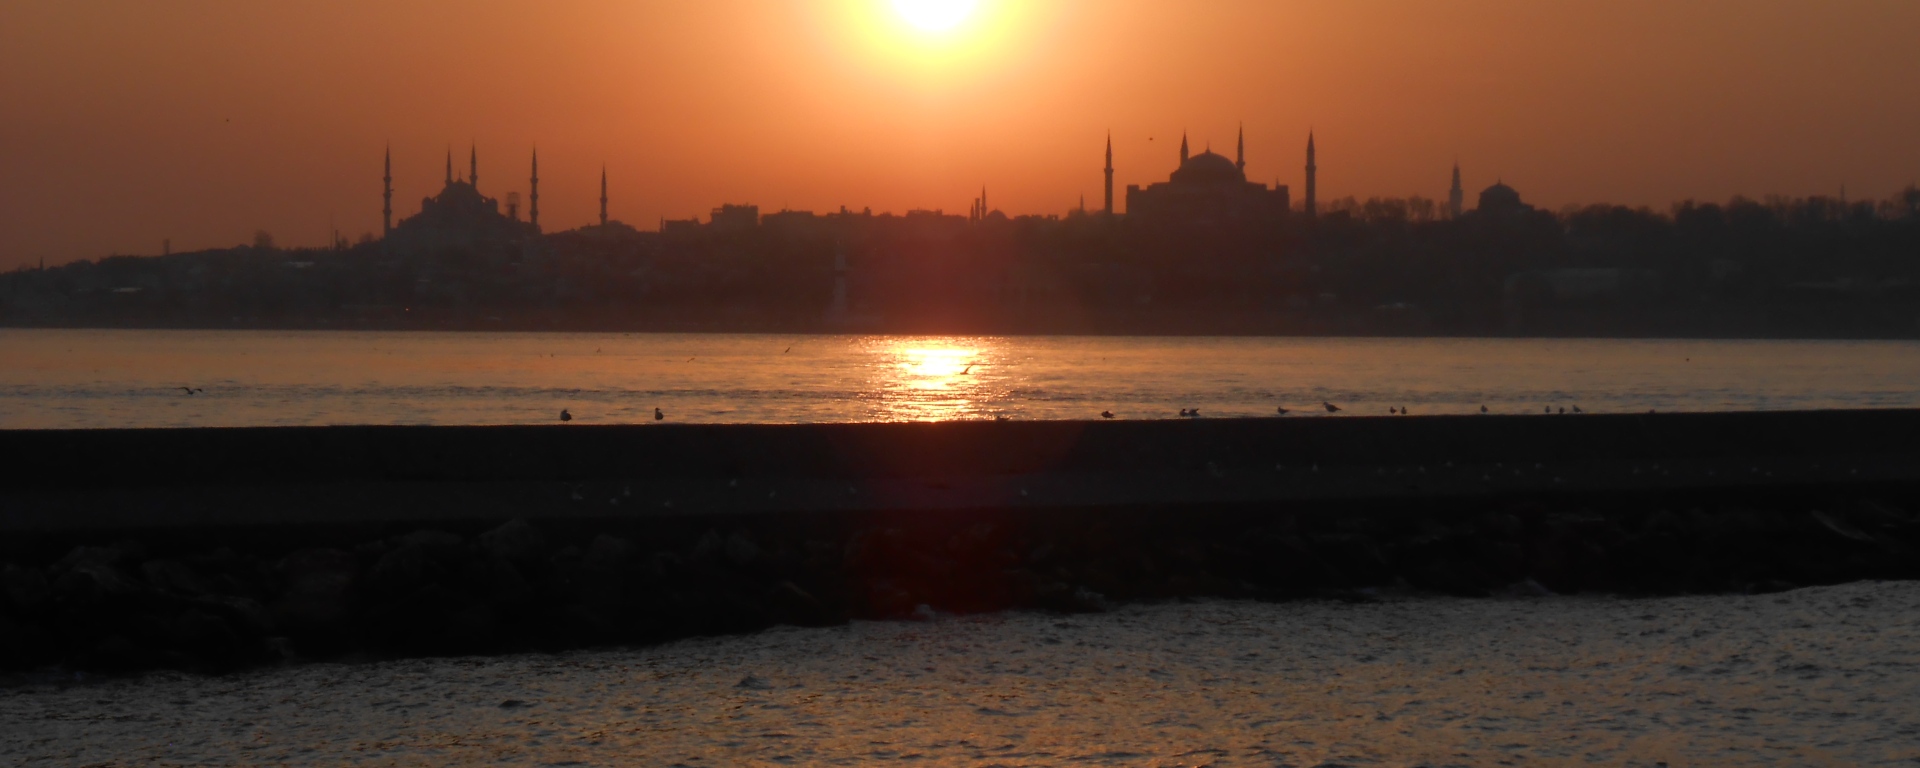 Mosques and minarets silhouetted by Istanbul sunset